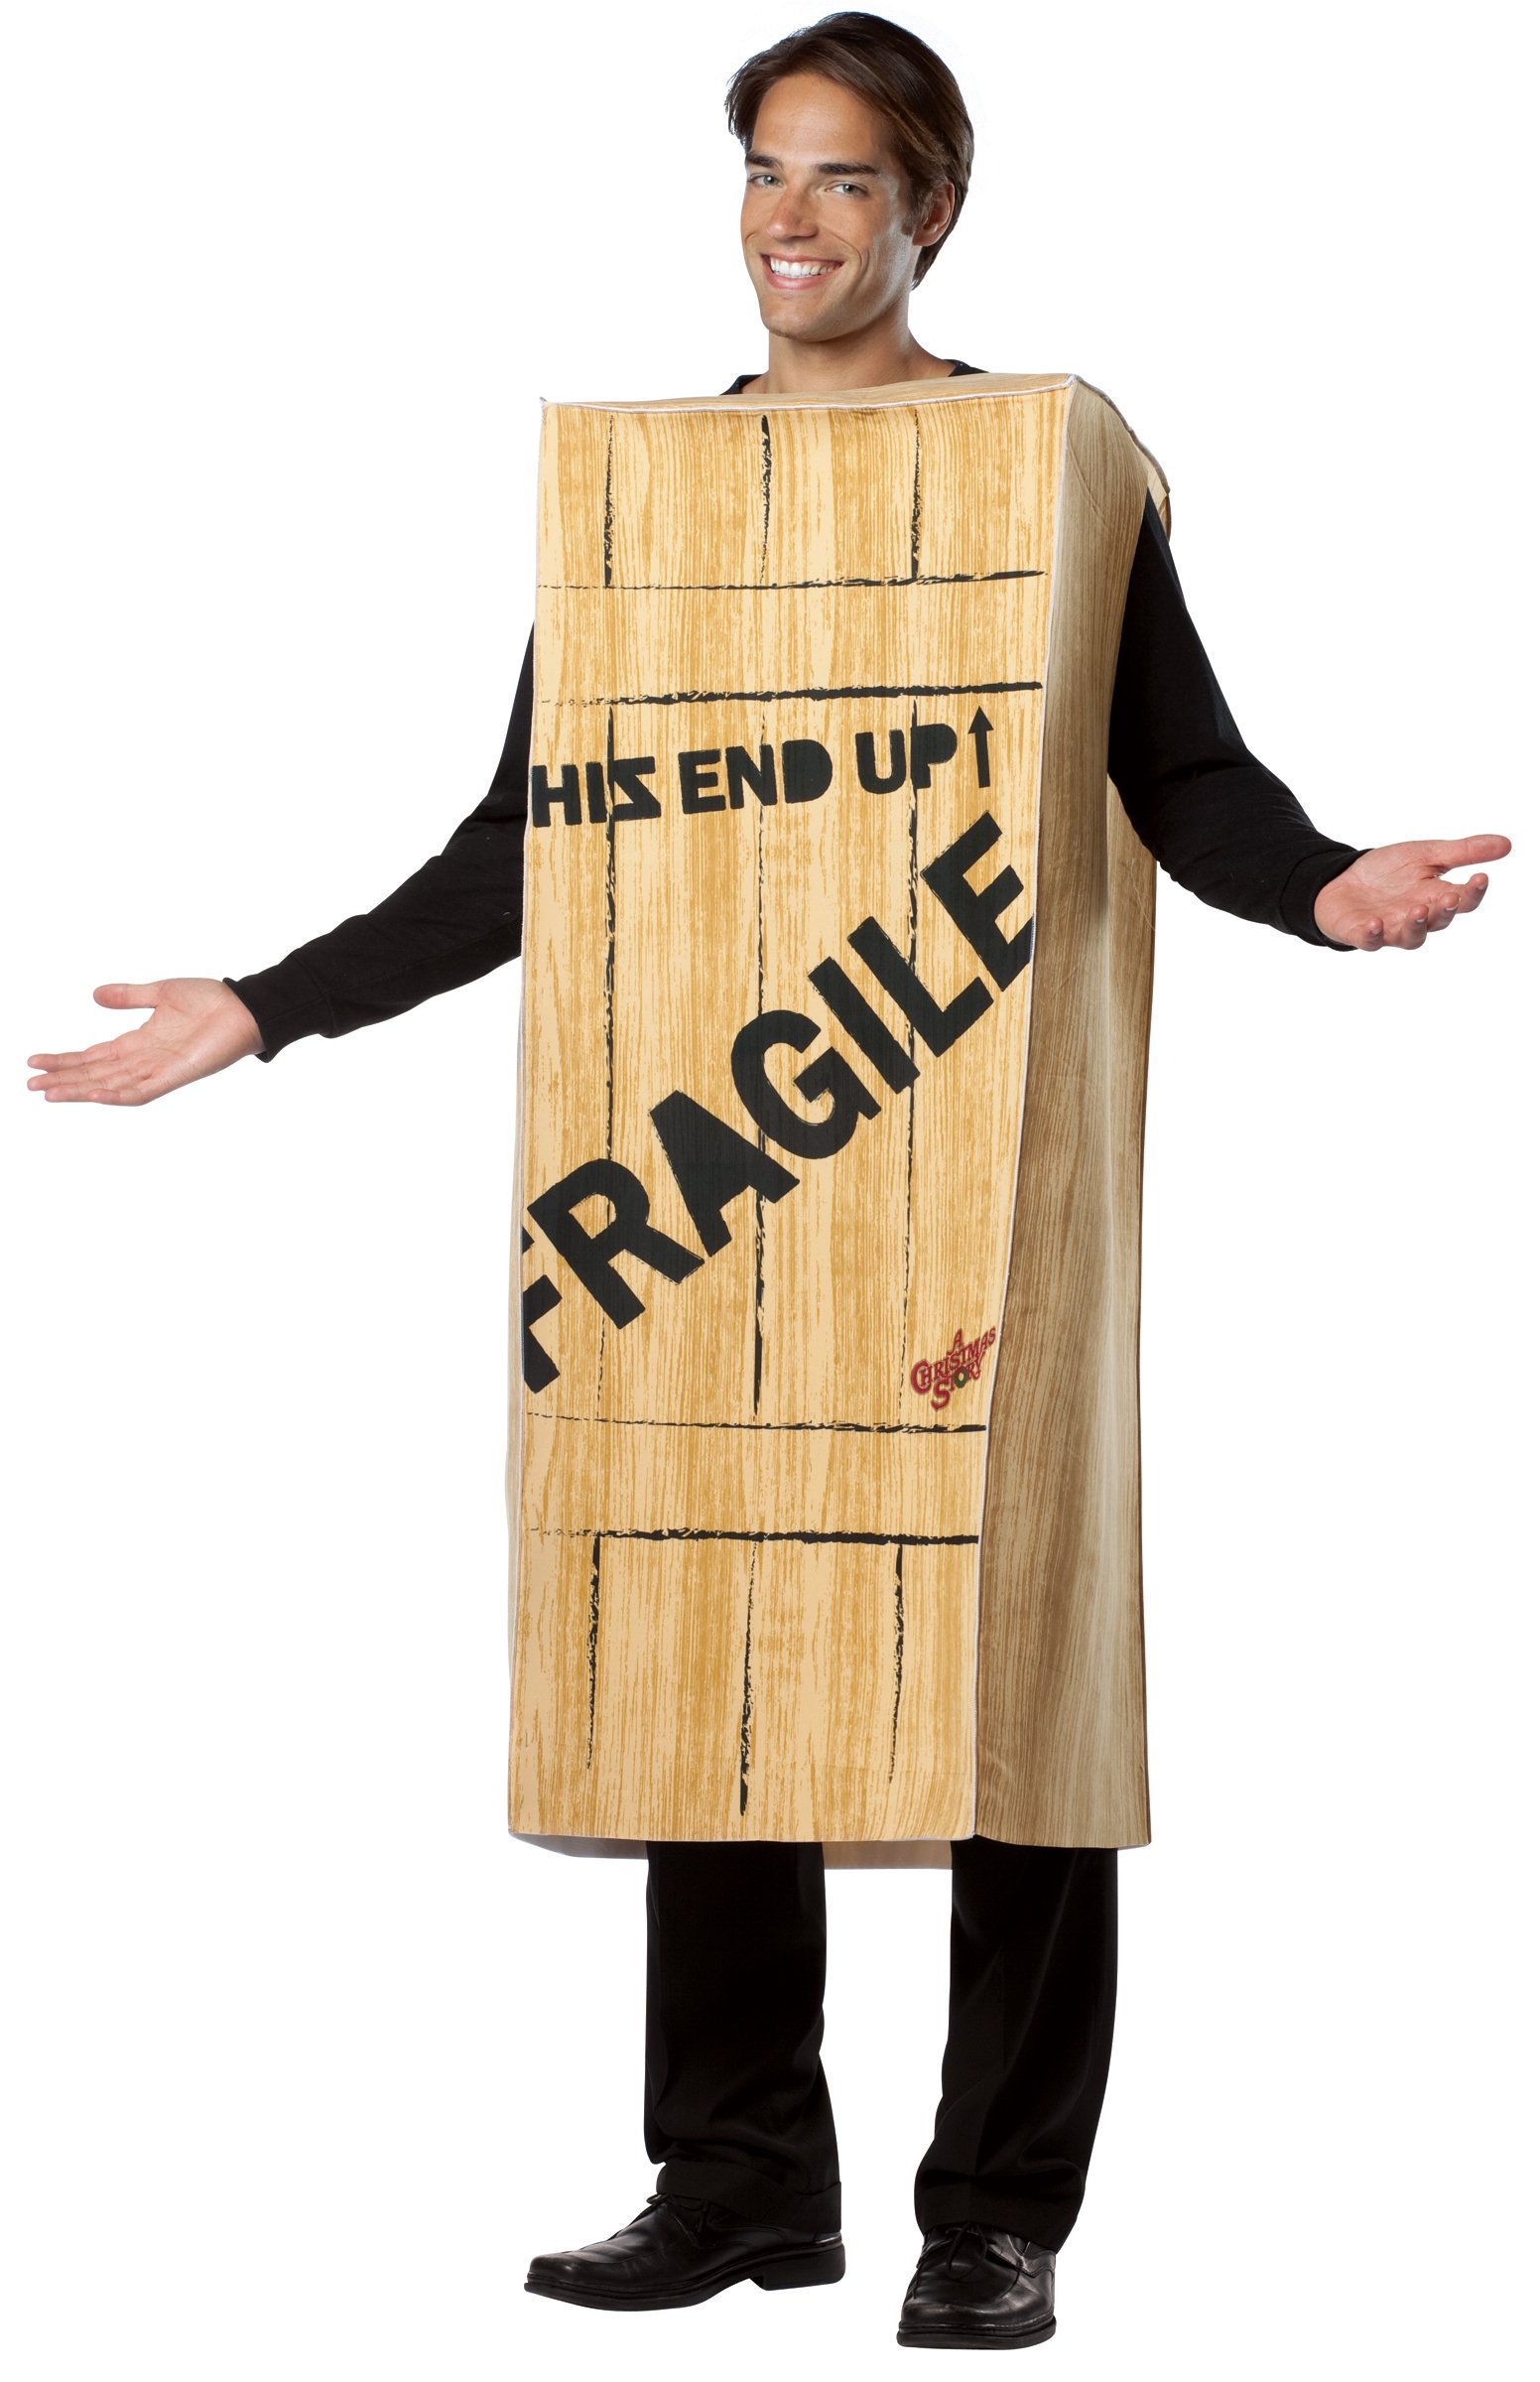 A Christmas Story - Fragile Wooden Crate Adult Costume